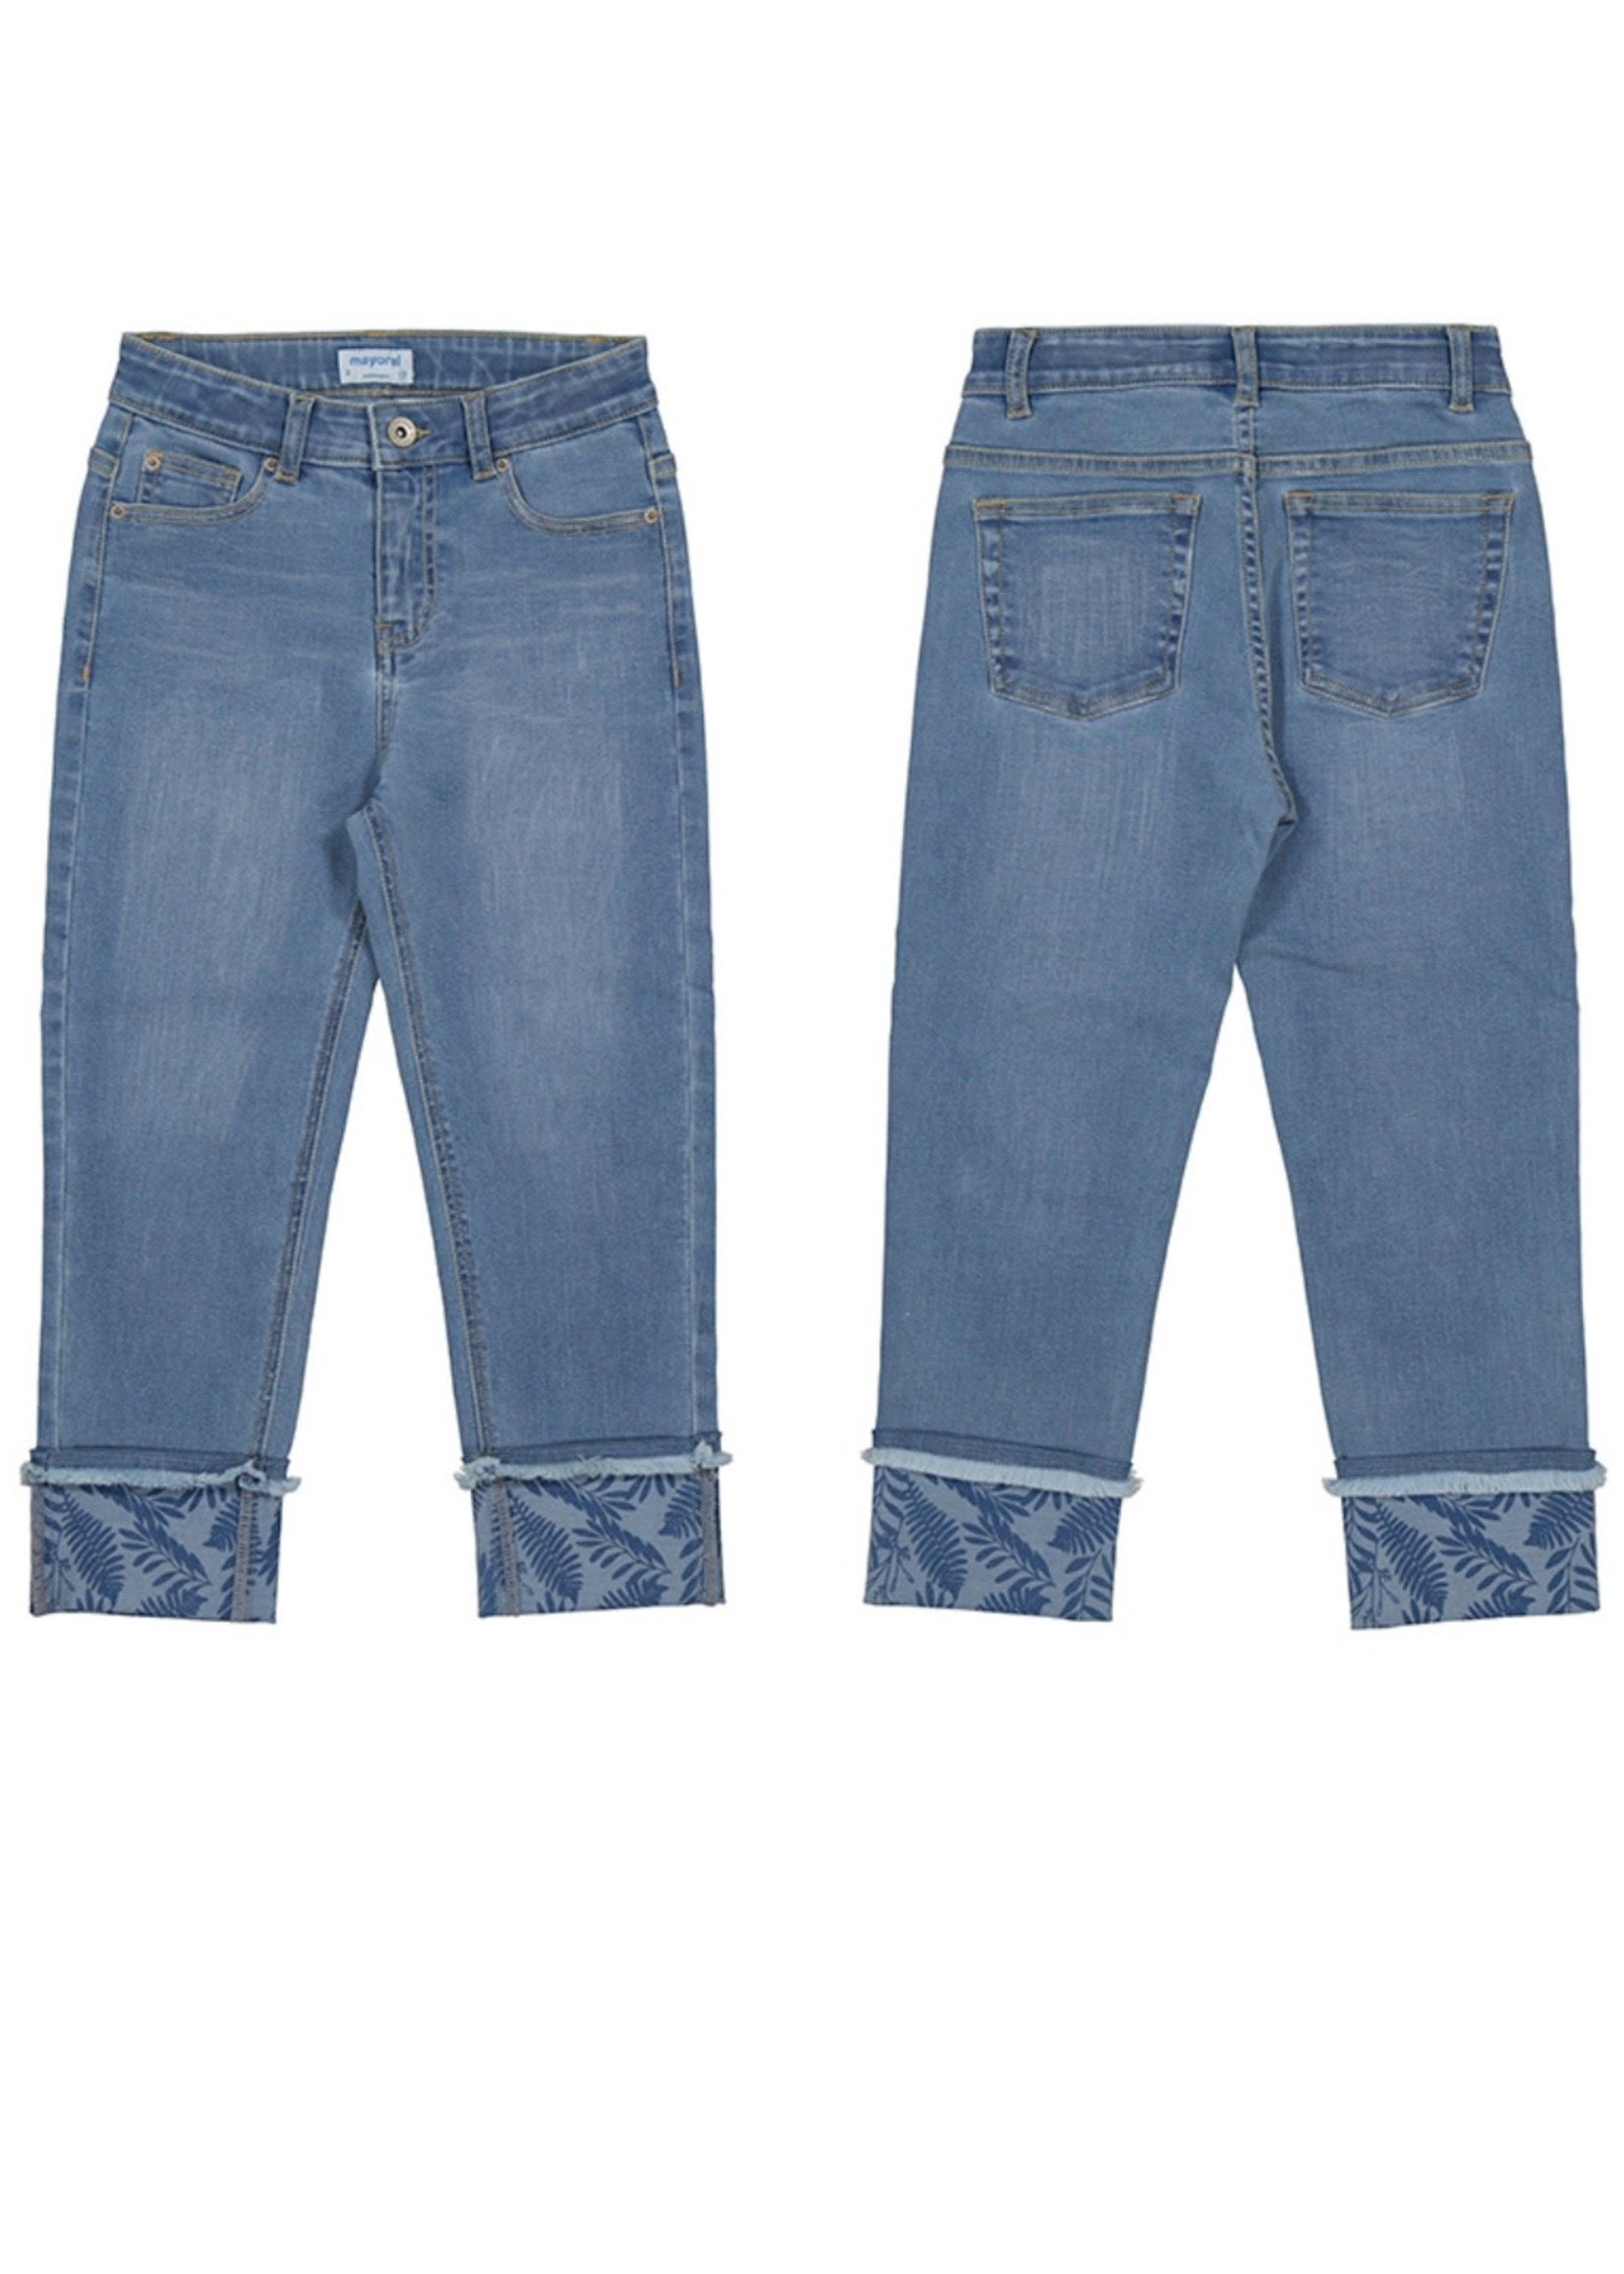 Mayoral Mayoral, Light Denim Cropped Pants with Palm Print Cuffs